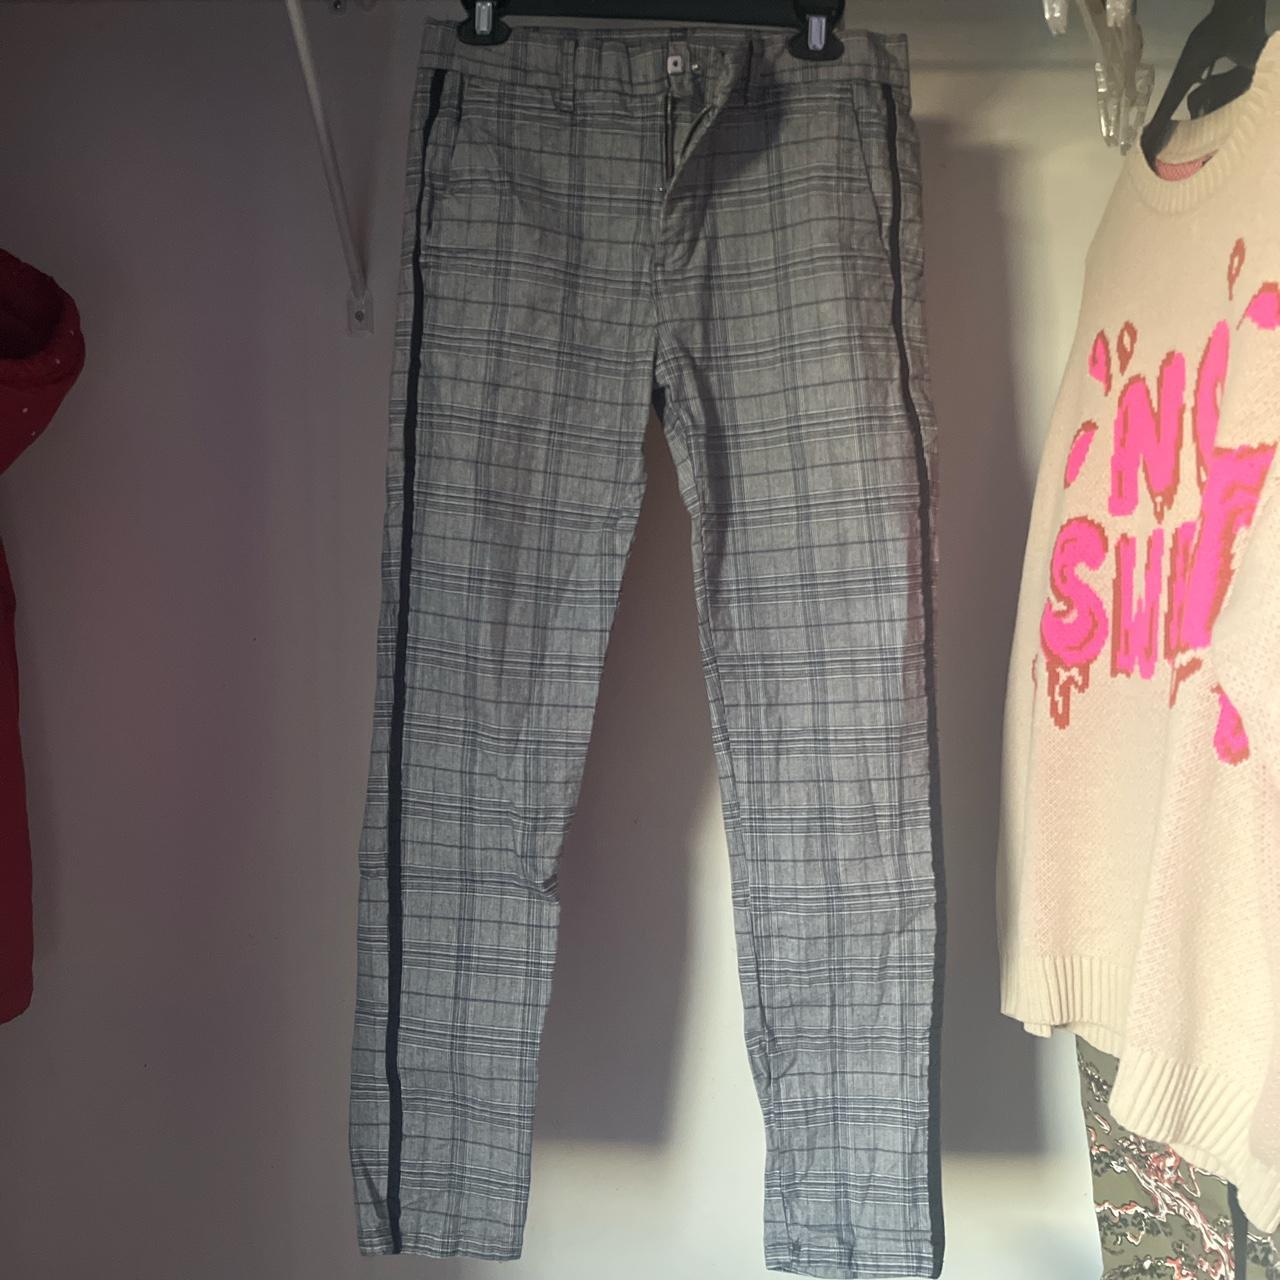 River Island Men's Grey and Navy Trousers (2)